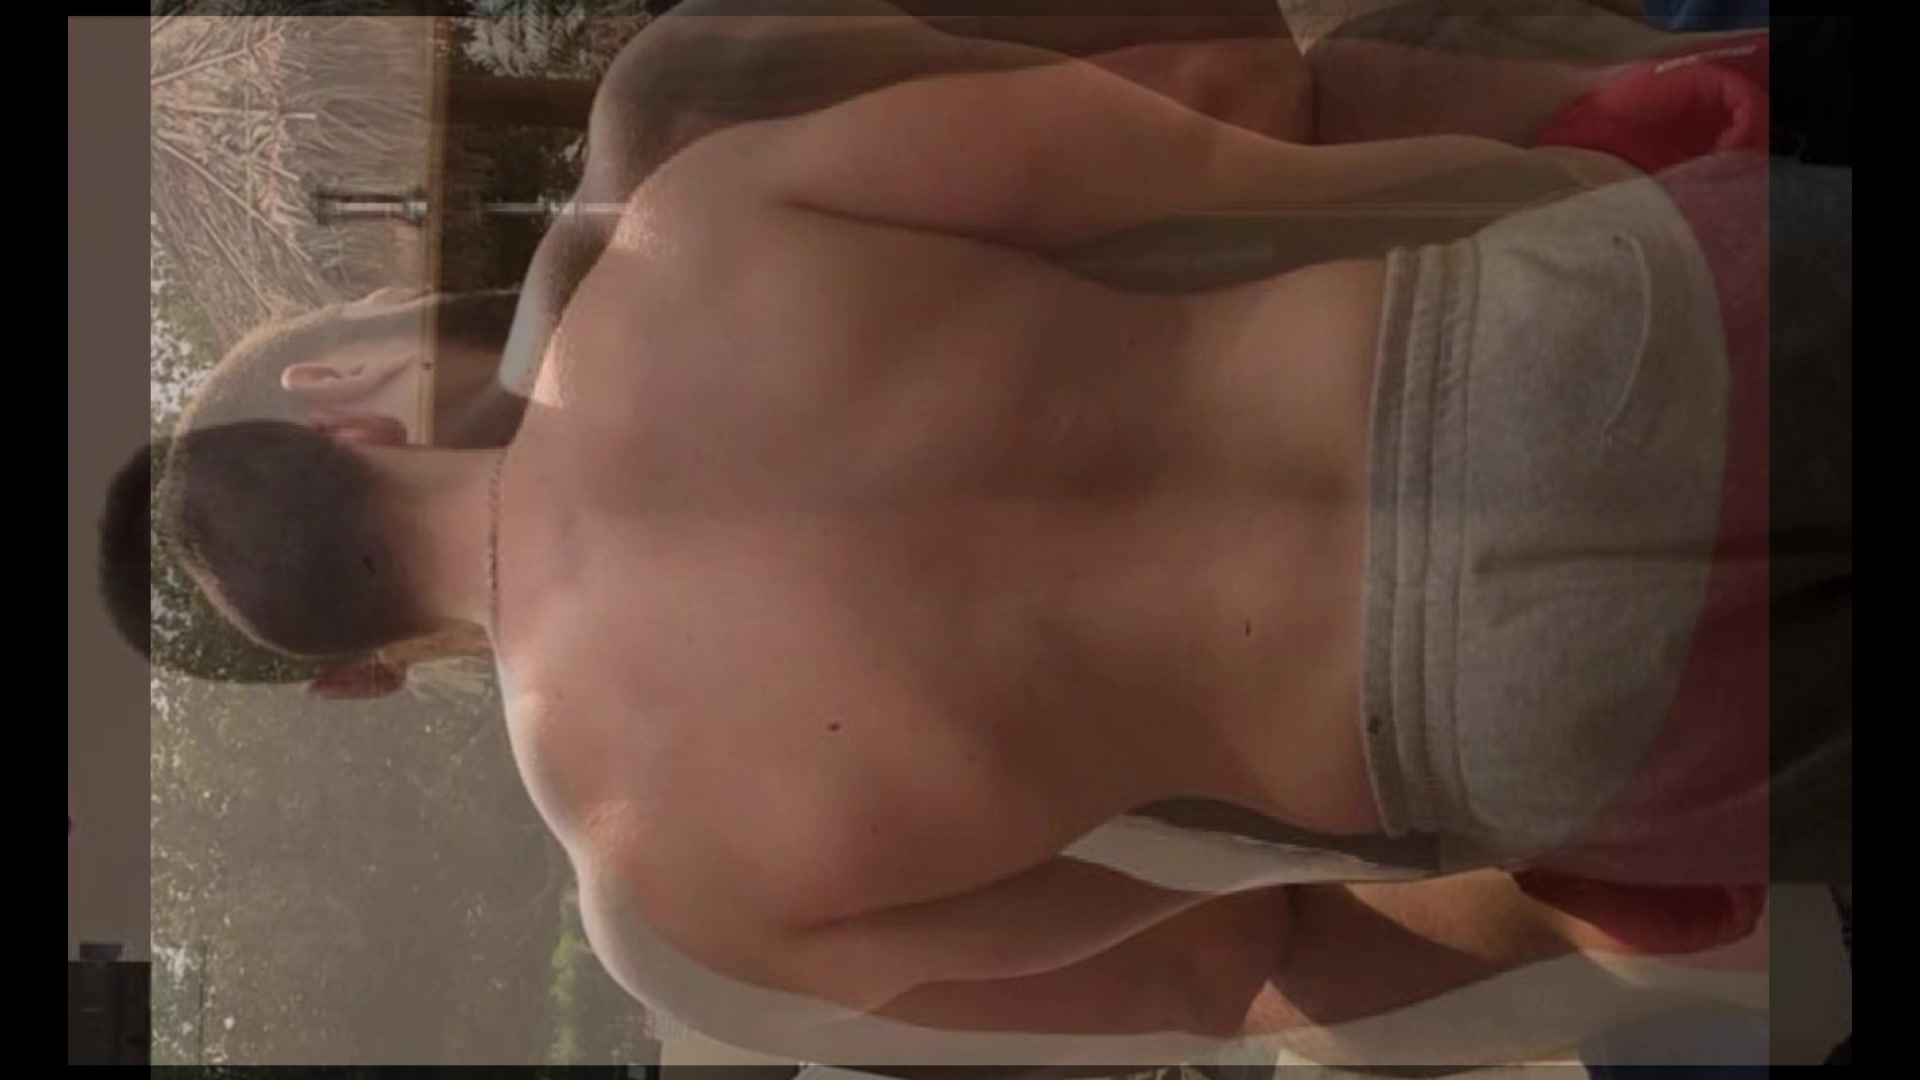 20 hot male backs from FB for hard whipping - video 2